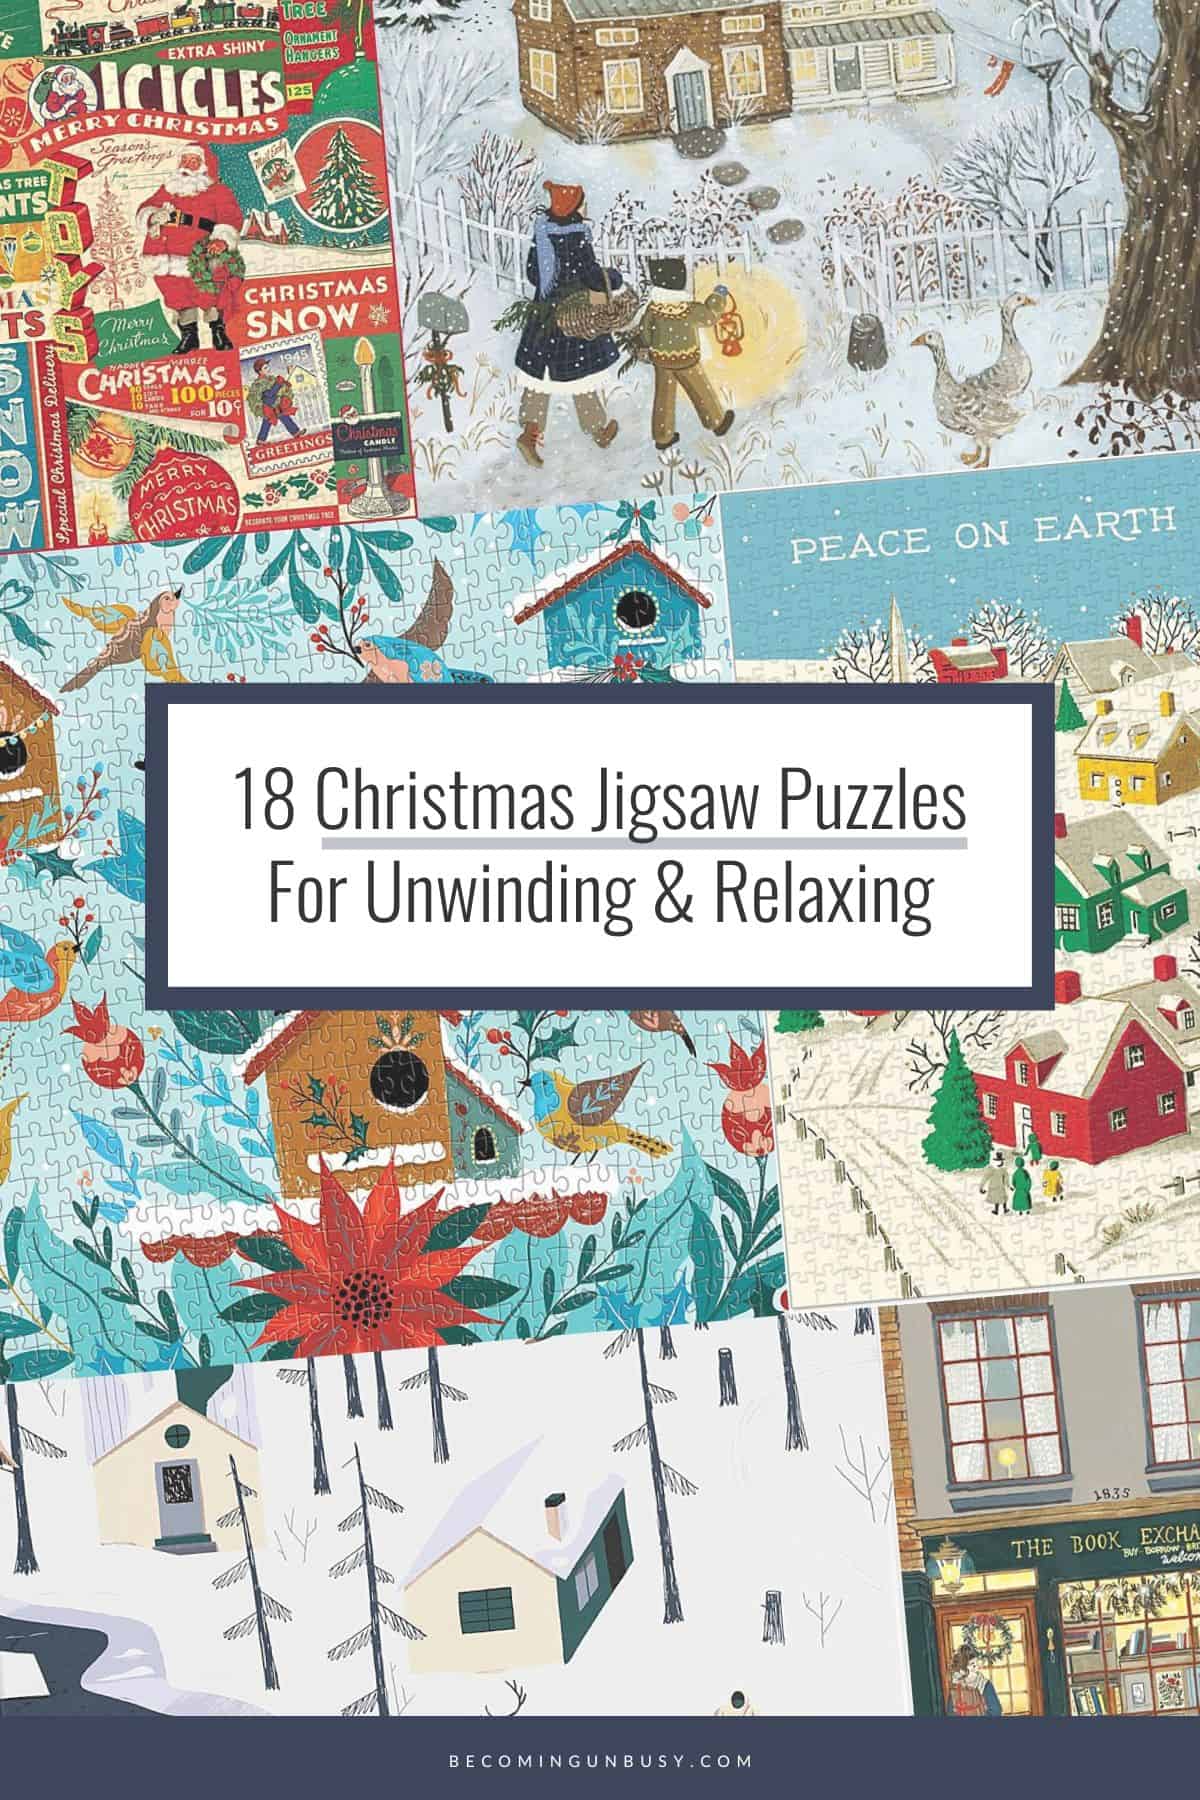 Collage of Christmas jigsaw puzzles including a Christmas tree, poinsettia, country scene and bookstore with the post headline on top for Pintrest, "18 Christmas Jigsaw Puzzles For Unwinding & Relaxing."